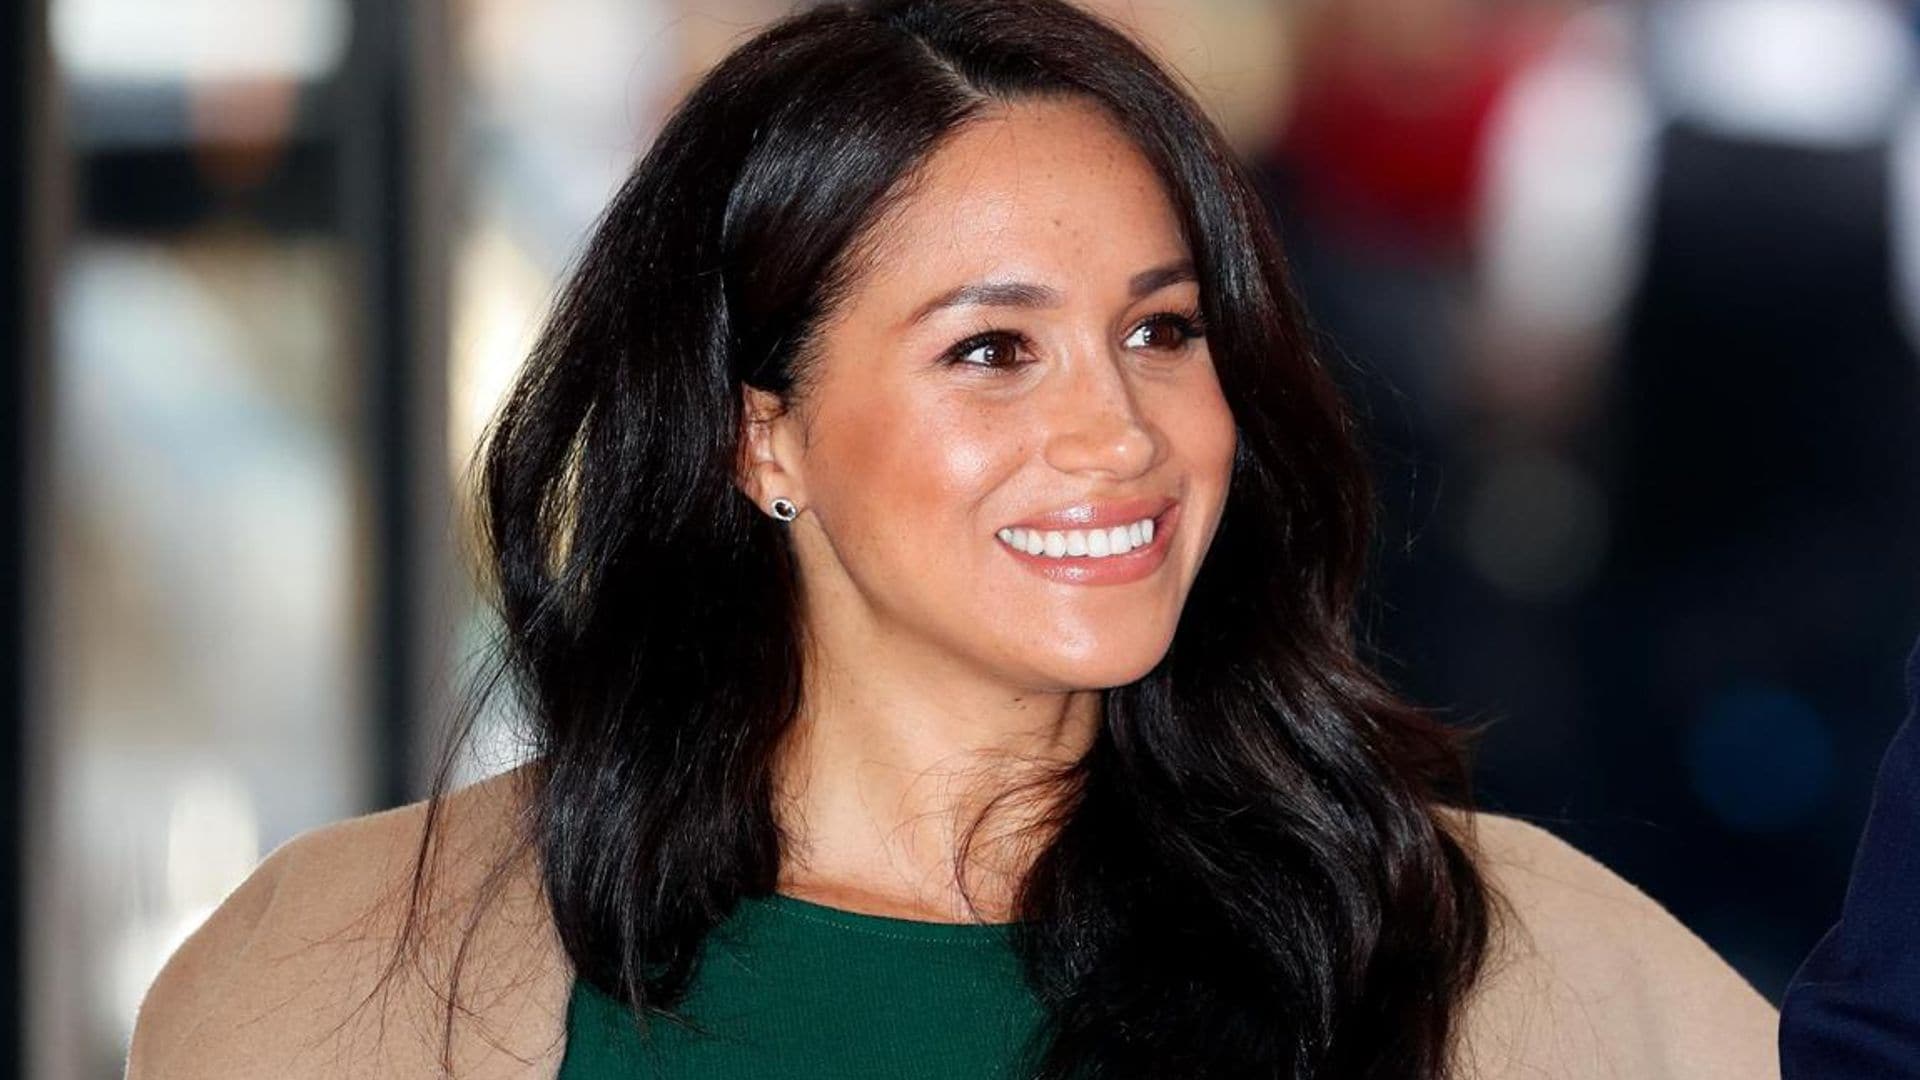 Meghan Markle protects herself from 'negative vibes' with evil eye during surprise zoom call